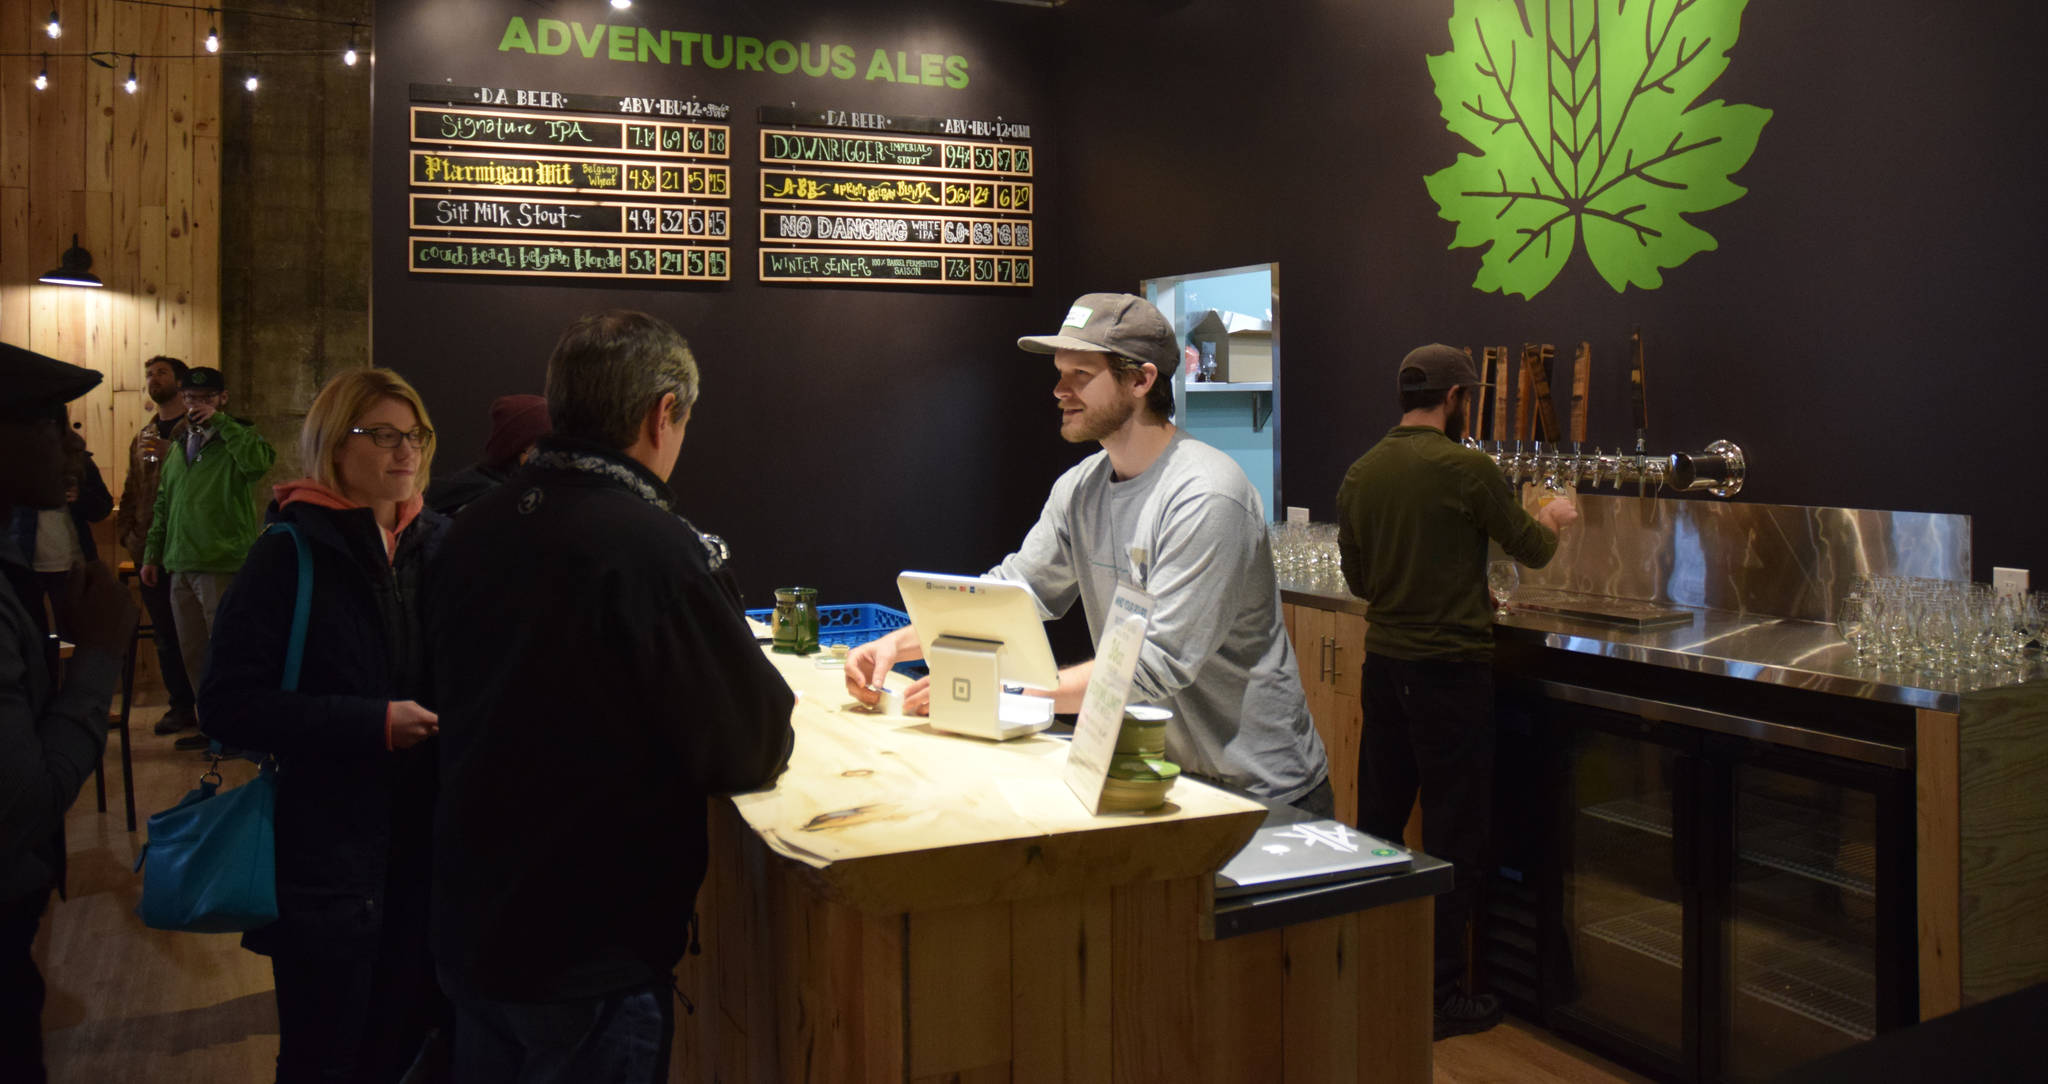 Devil’s Club Brewing Co.’s Evan Wood talks to customers at the microbrewery’s new taproom on Franklin Street on Wednesday. (Kevin Gullufsen | Juneau Empire)